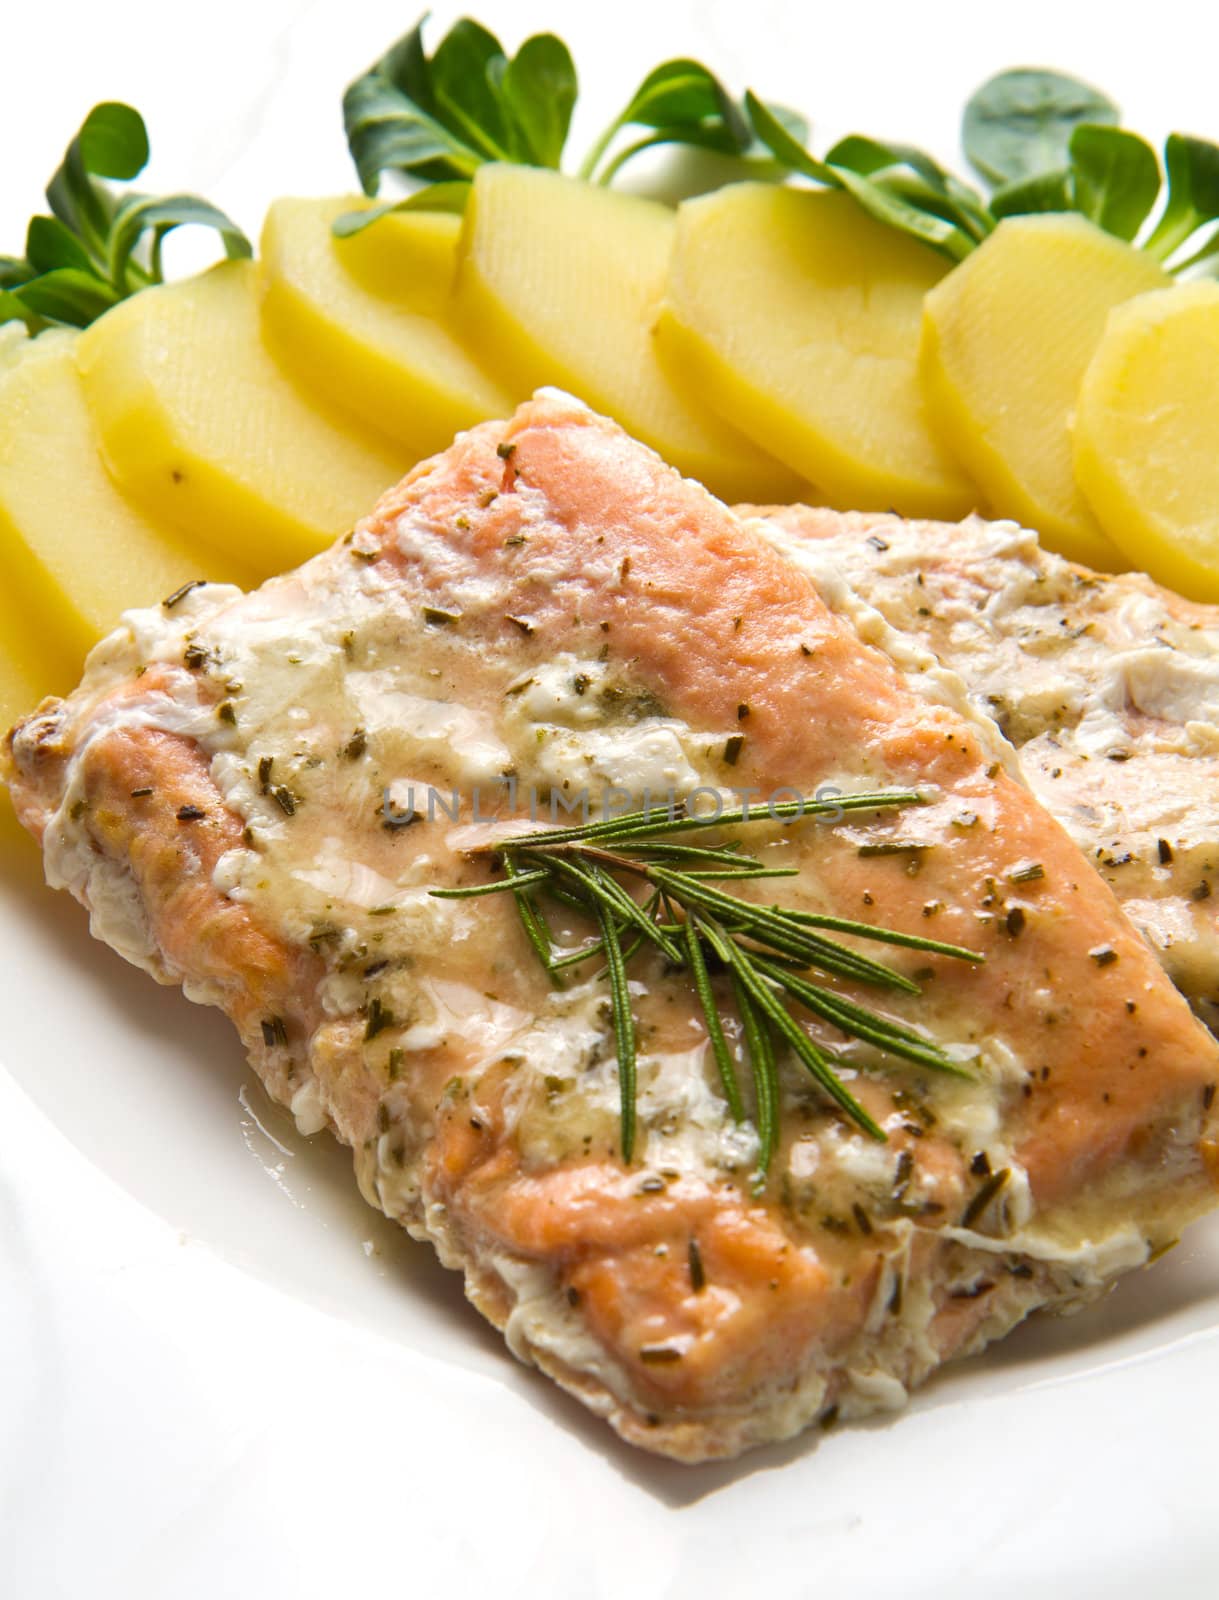 salmon fillet with potatoes by lsantilli